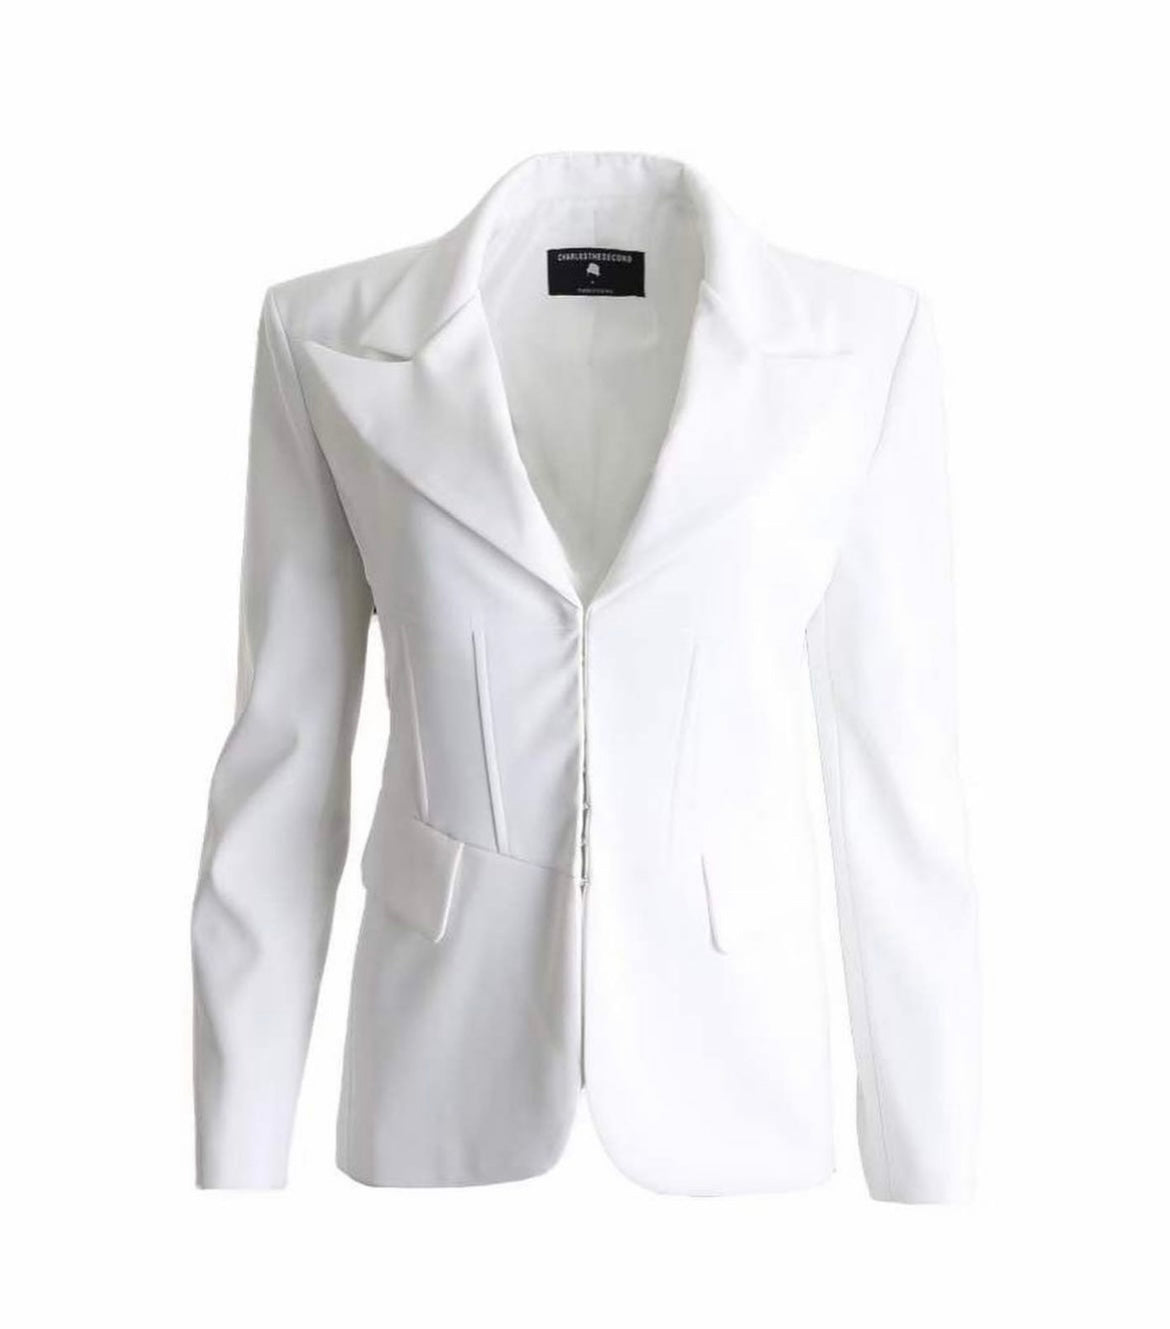 Double Collar Structured Ribs Suit Jacket